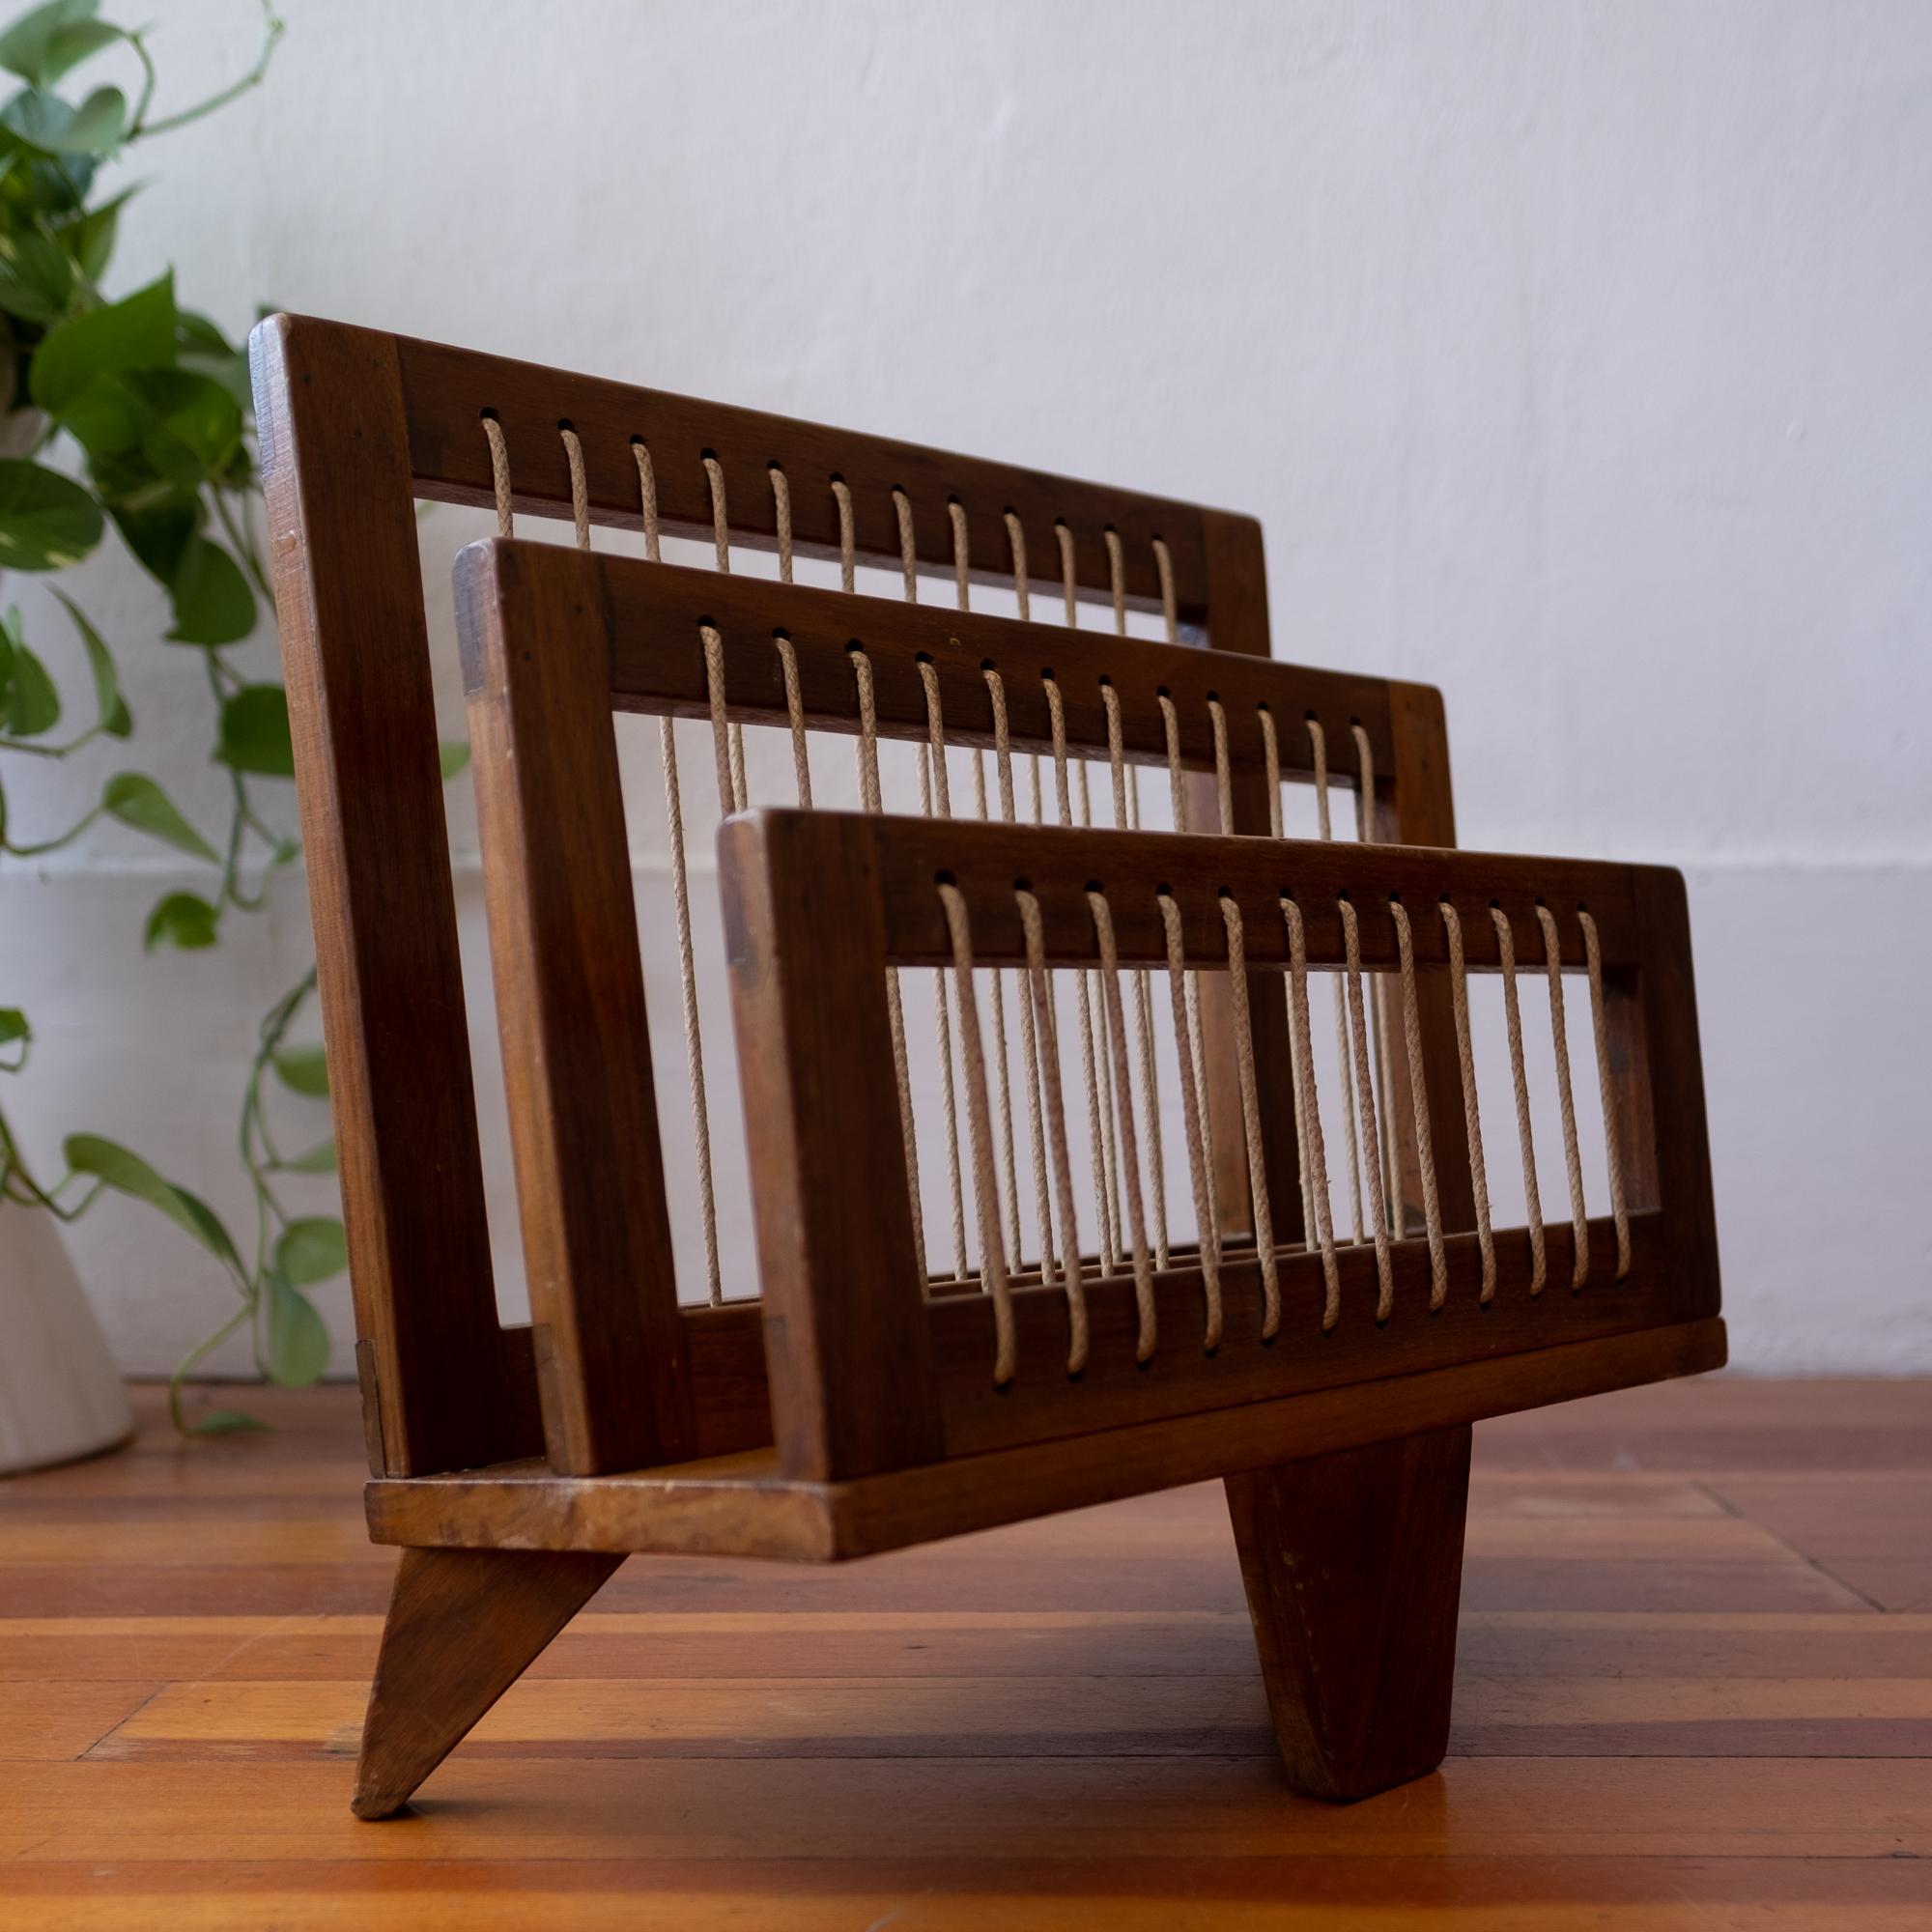 American Modernist Wood and String Magazine Rack, 1950s